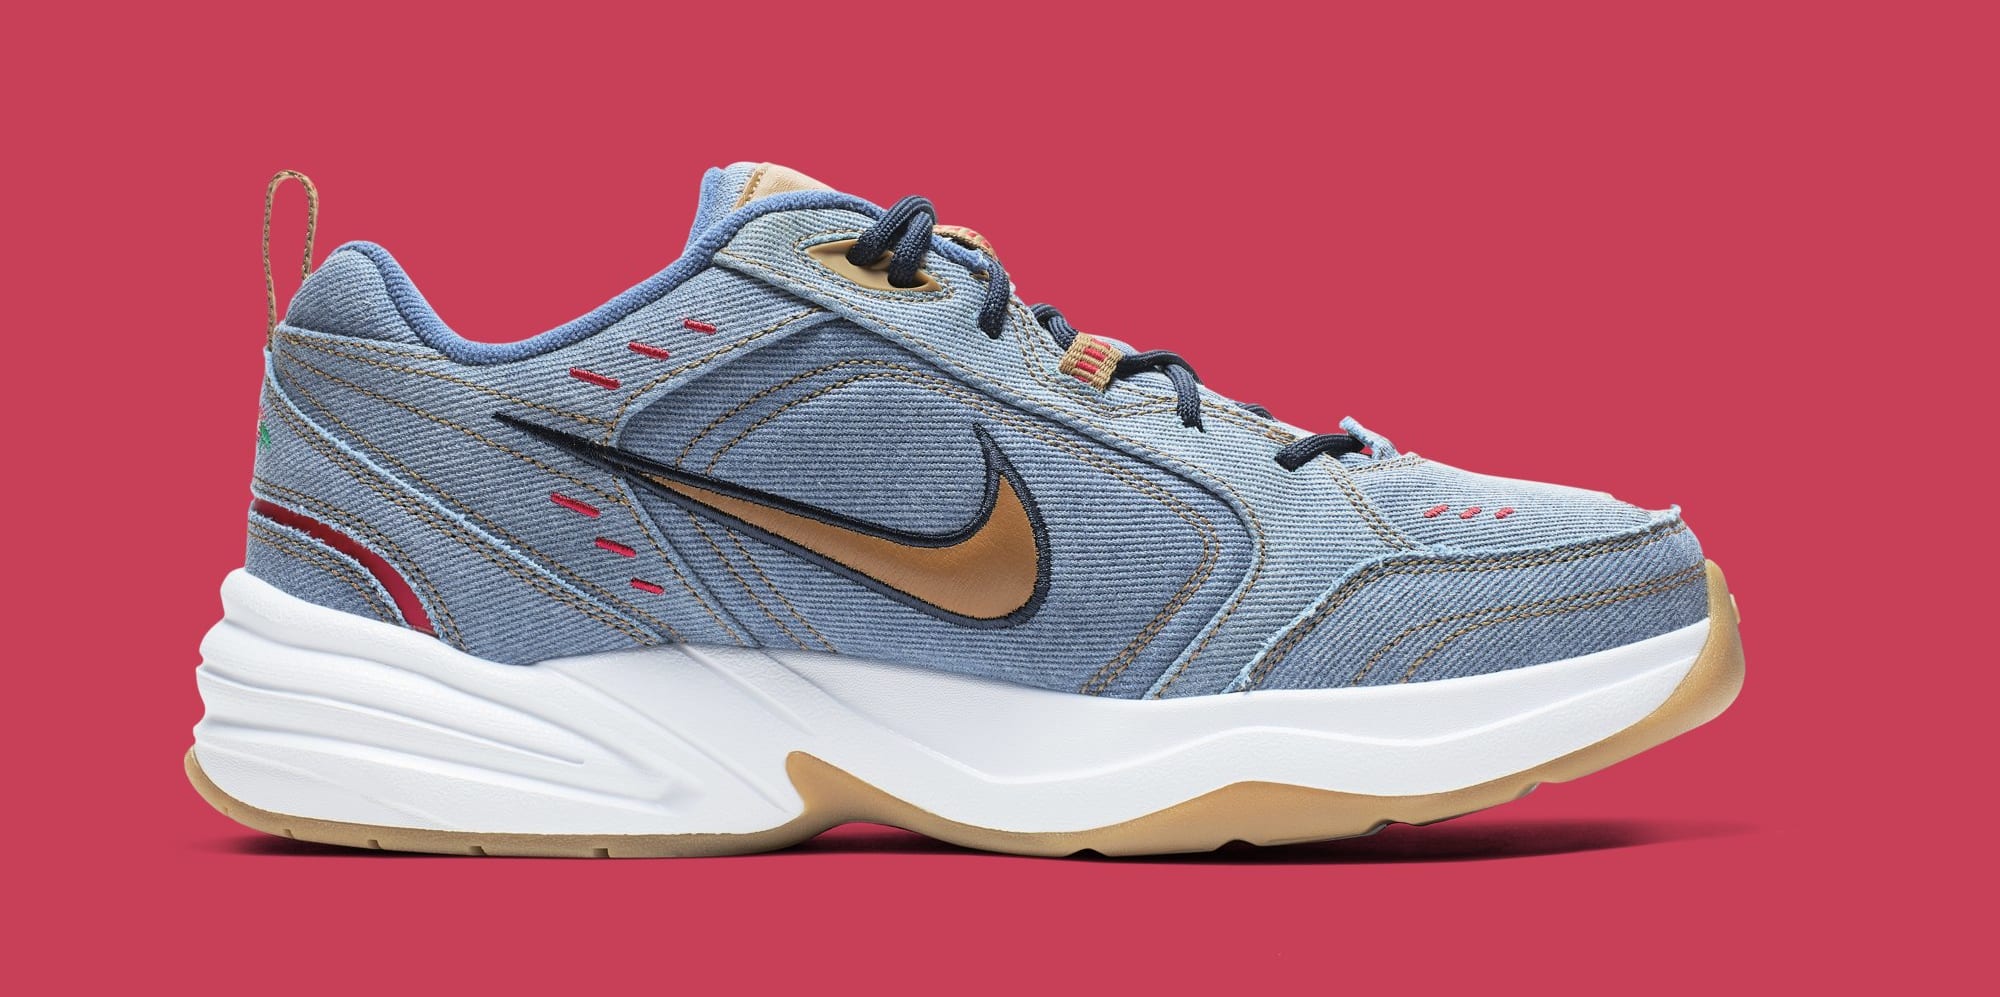 Nike Air Monarch 4 'Father's Day 2019' AV6676-400 (Medial)